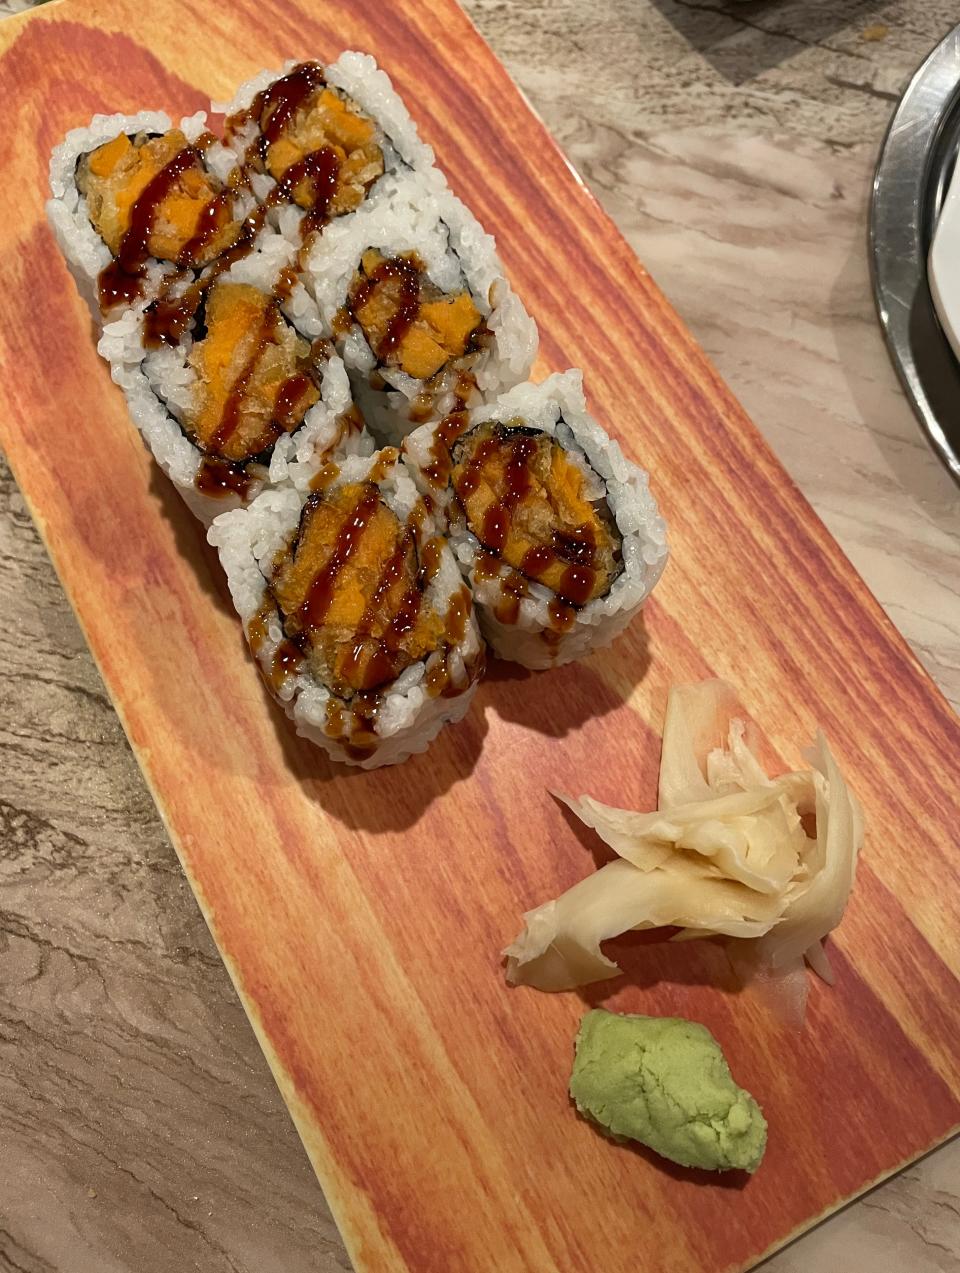 The sweet potato roll is a classic roll at Kintaro.